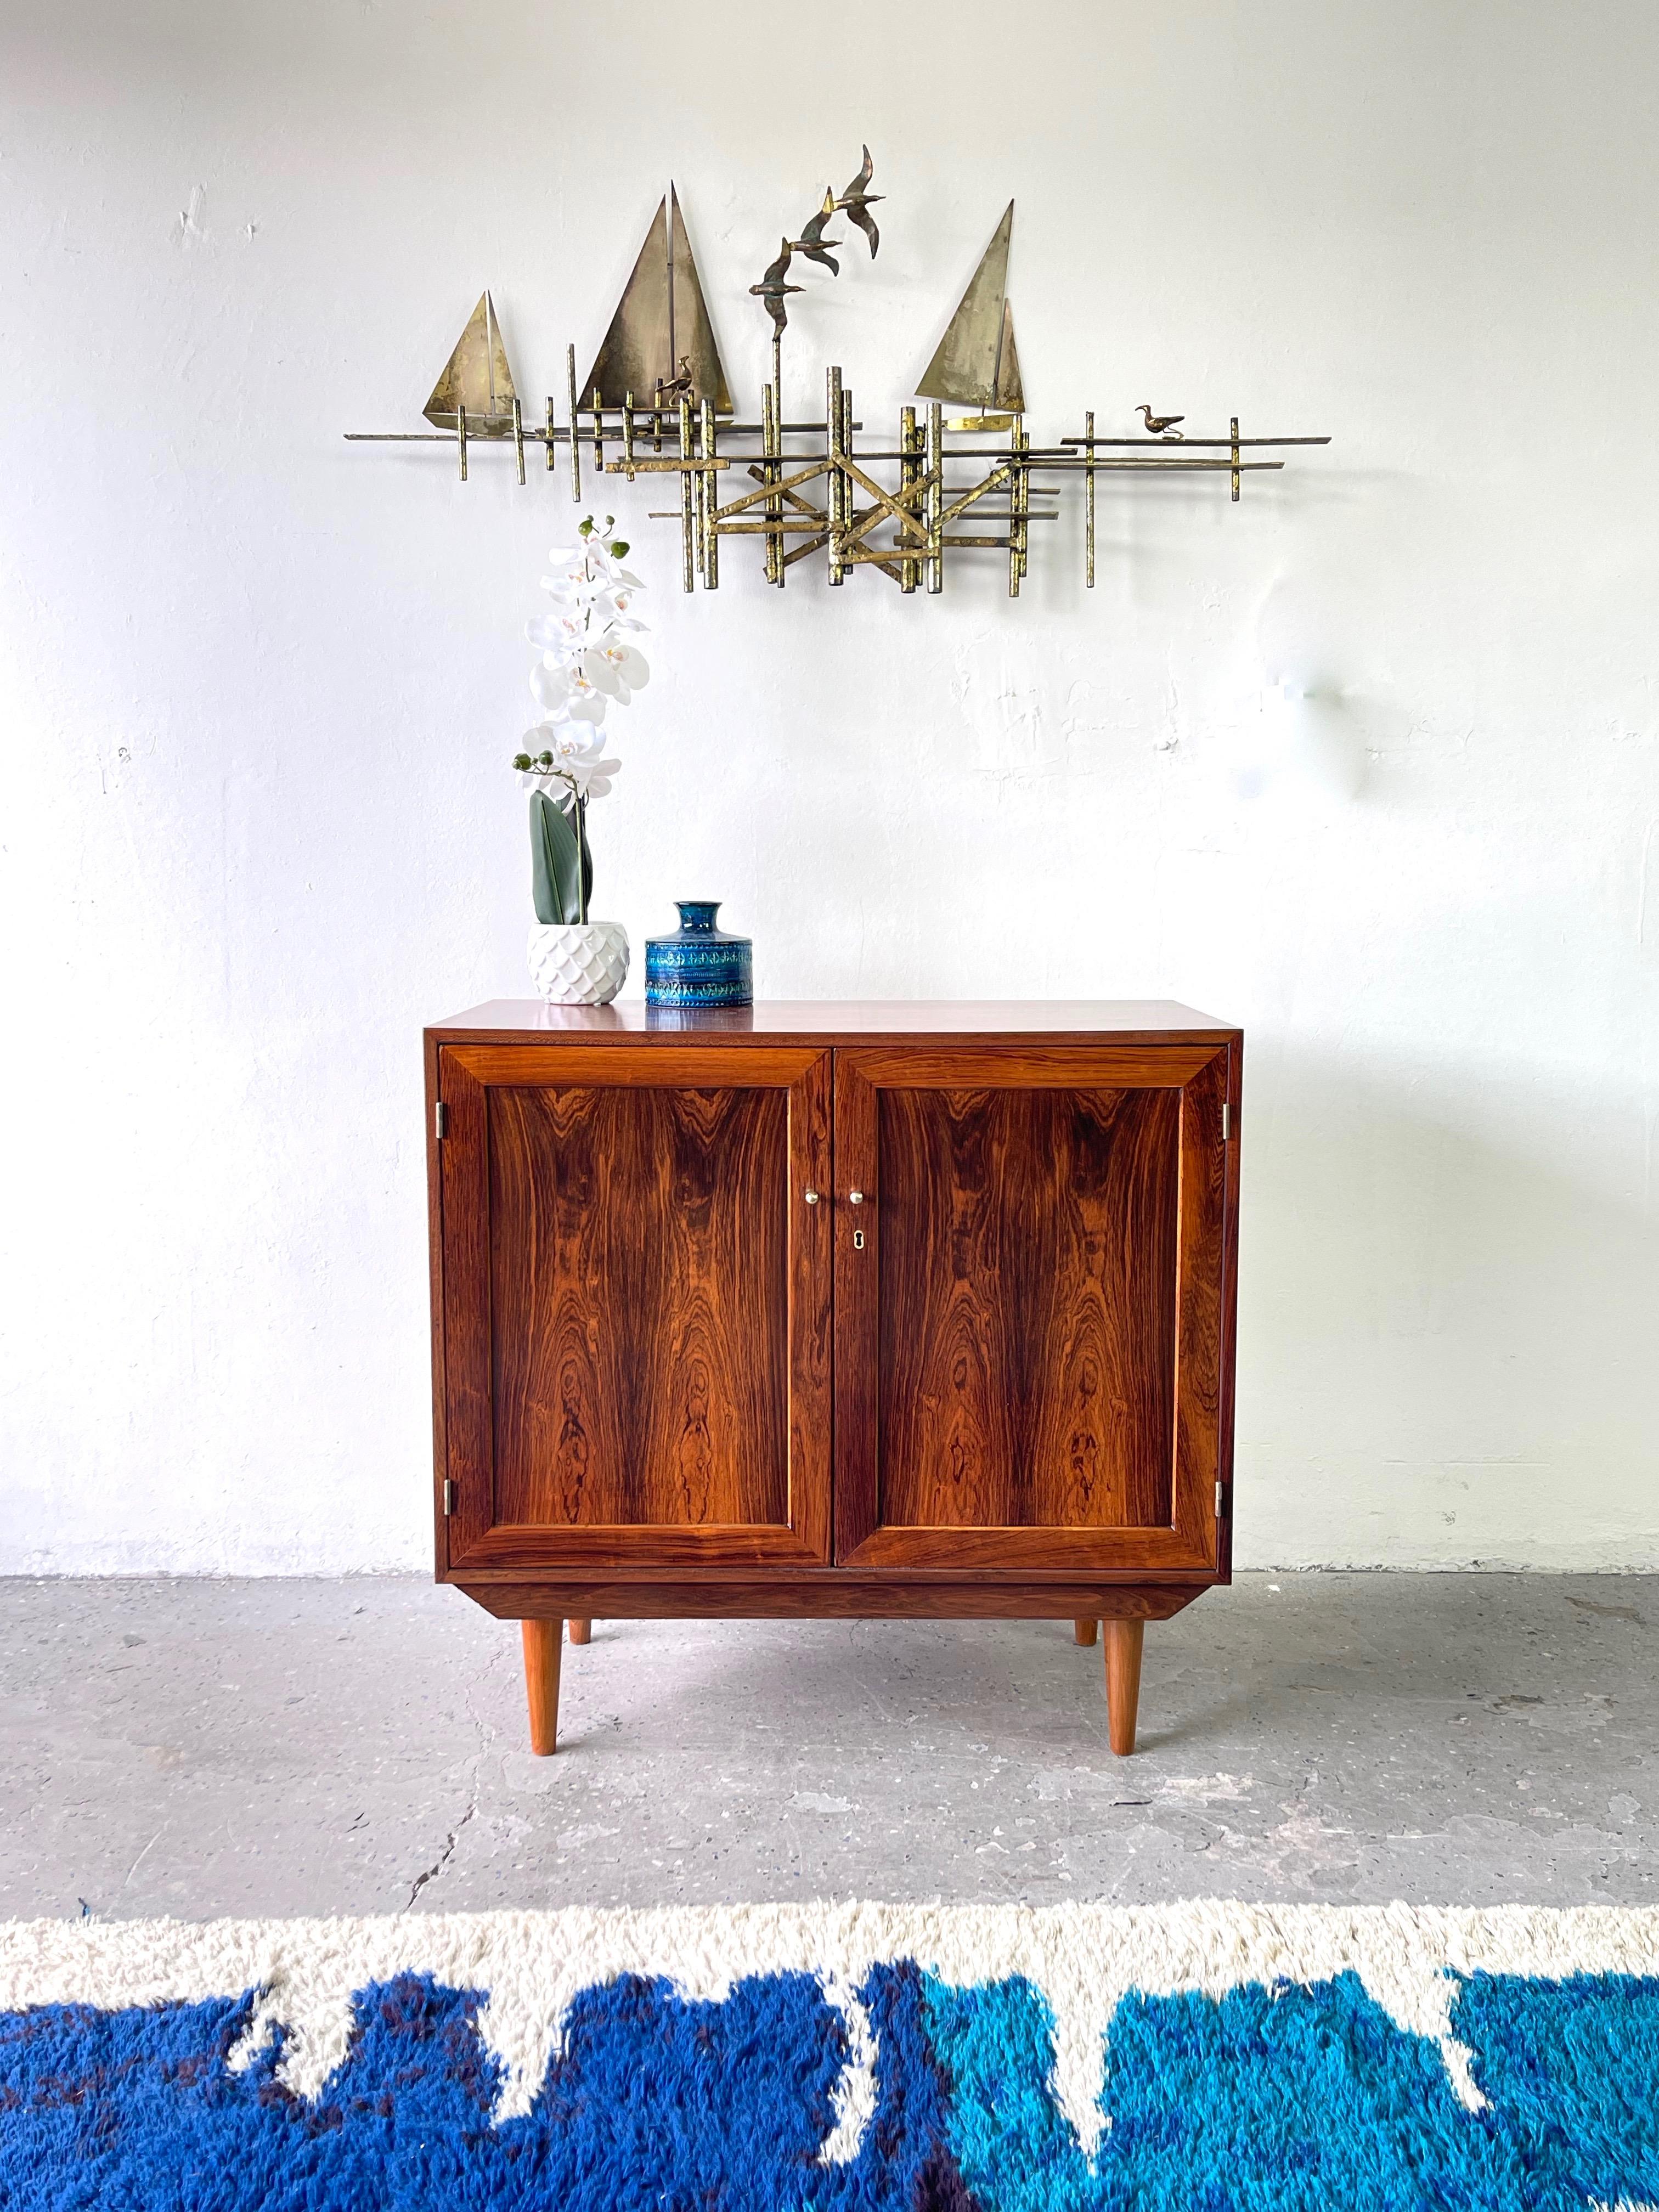 Super cool vintage Danish rosewood cabinet by Dyrlund. The cabinet has been restored, allowing the rosewood to be displayed in full glory. Dyrlund makes some of the finest case goods we have encountered with minimalist Scandinavian design enhanced